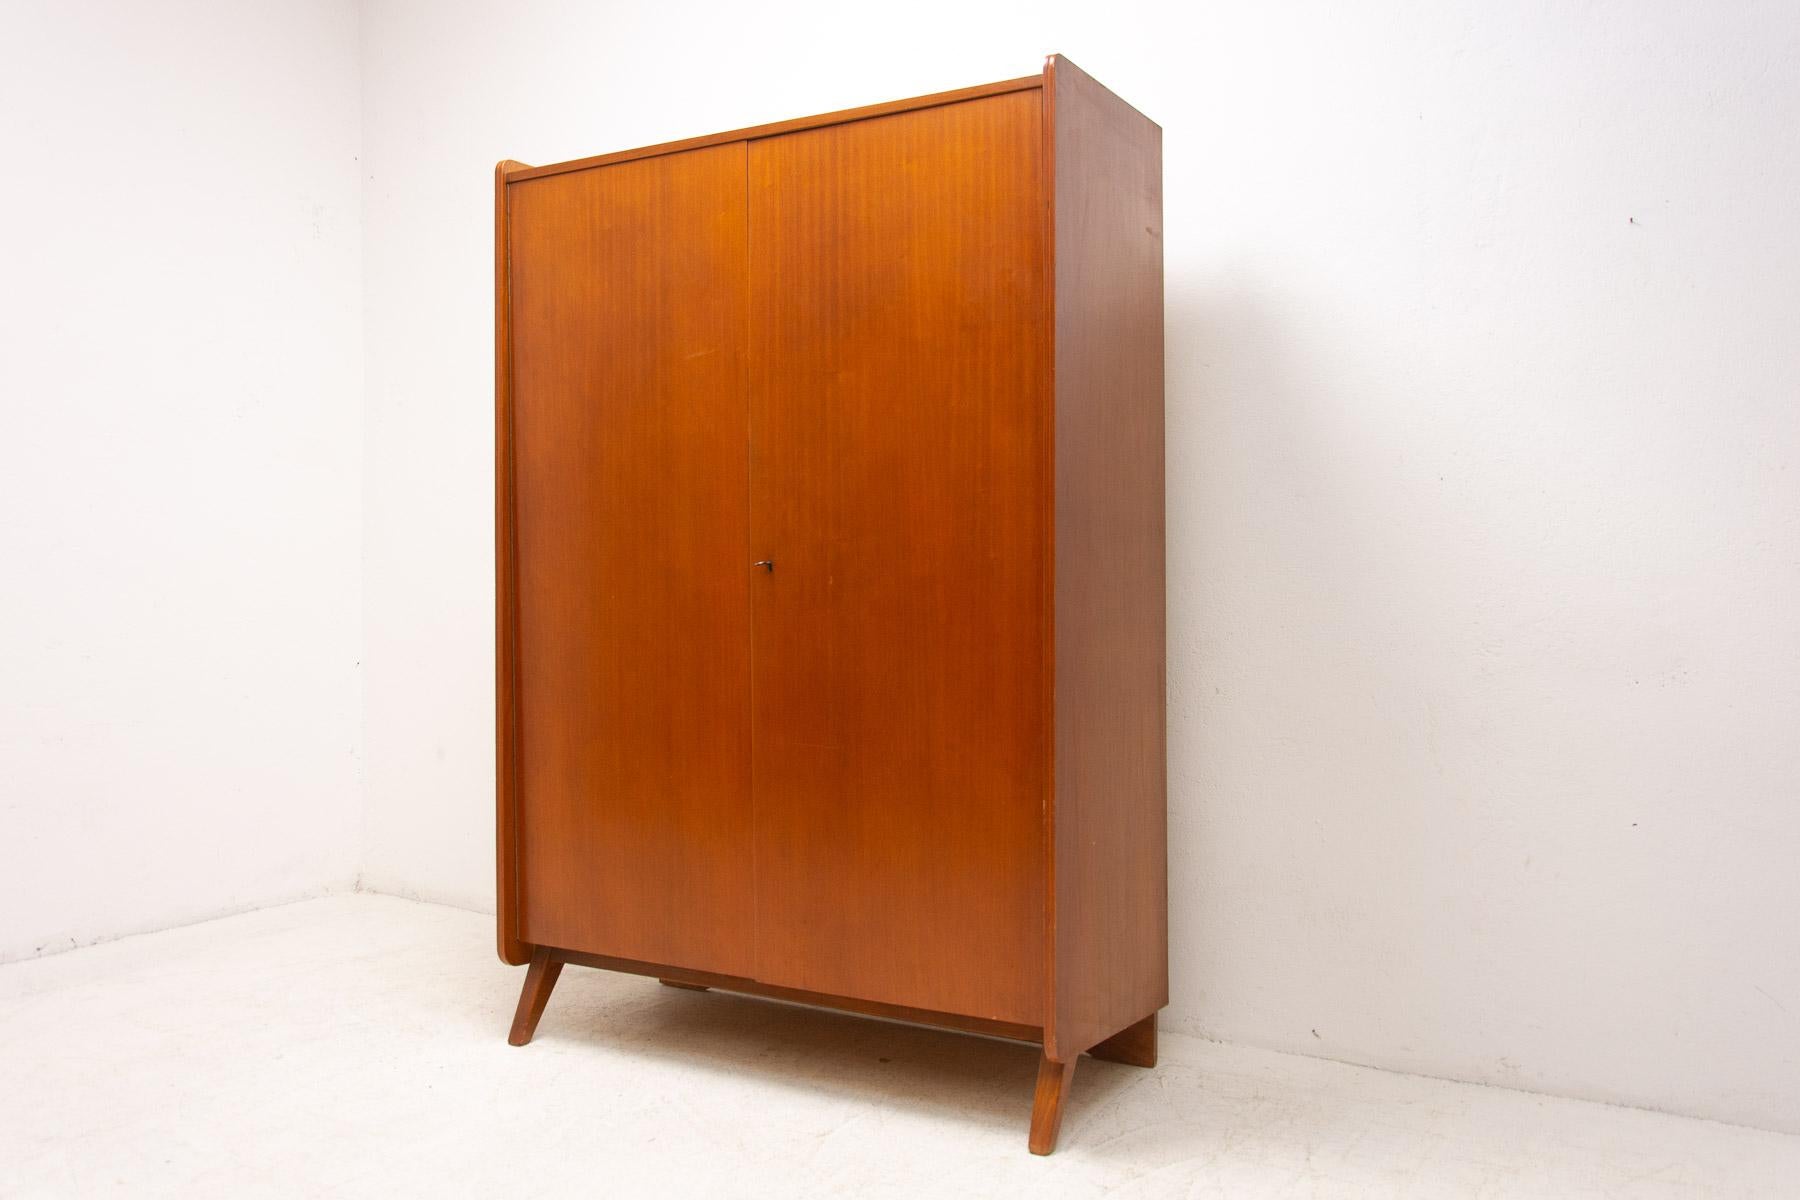 Mid century Vintage wardrobe from the 1960´s. It was designed by František Jirák and manufactured by Nový Domov company in the former Czechoslovakia. Mahogany veneer. In good Vintage condition, showing signs of age and using.

 

Measures: